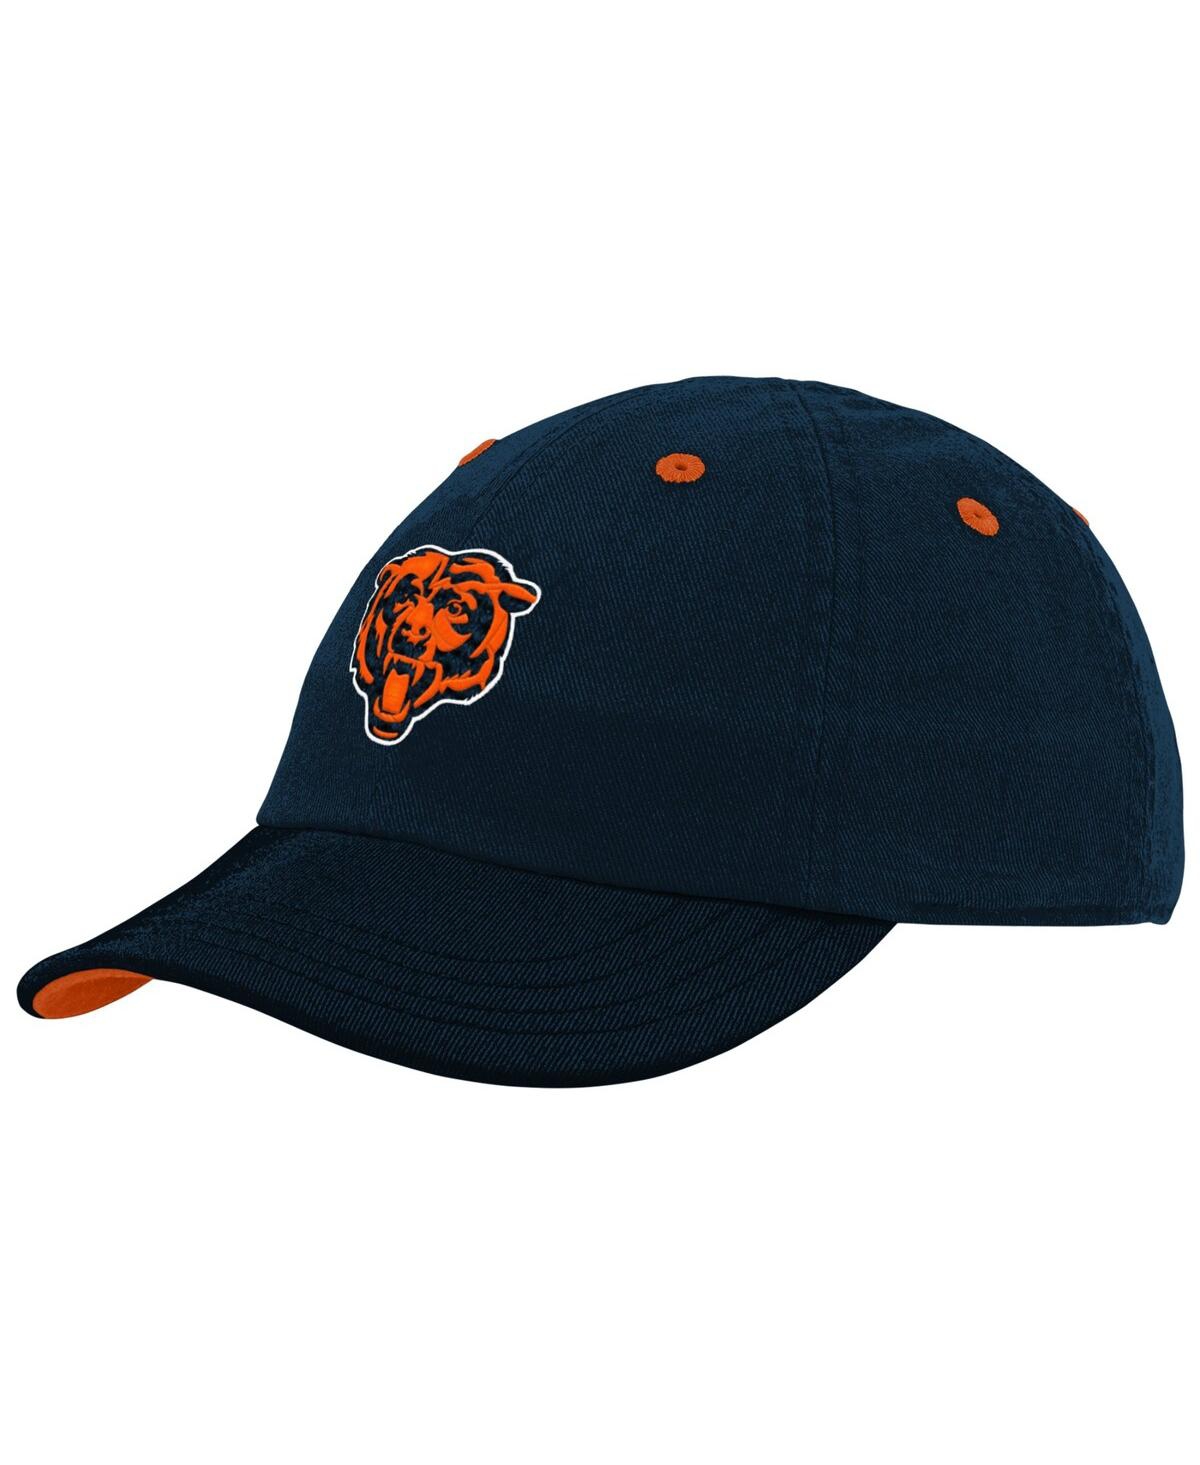 Outerstuff Babies' Infant Boys And Girls Navy Chicago Bears Team Slouch Flex Hat